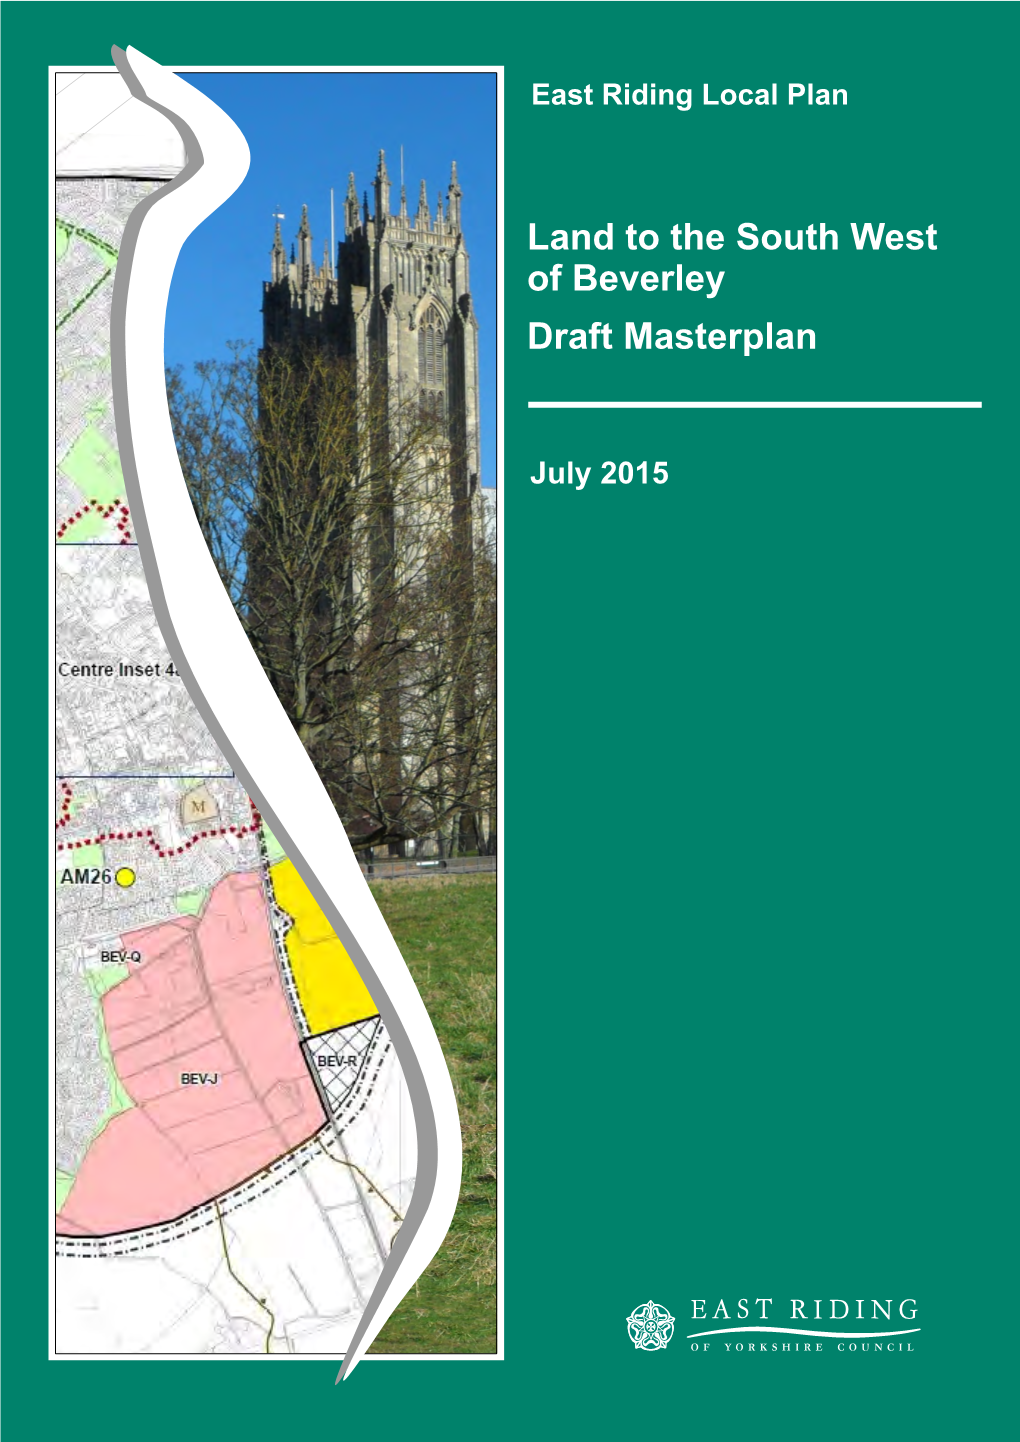 Land to the South West of Beverley Draft Masterplan